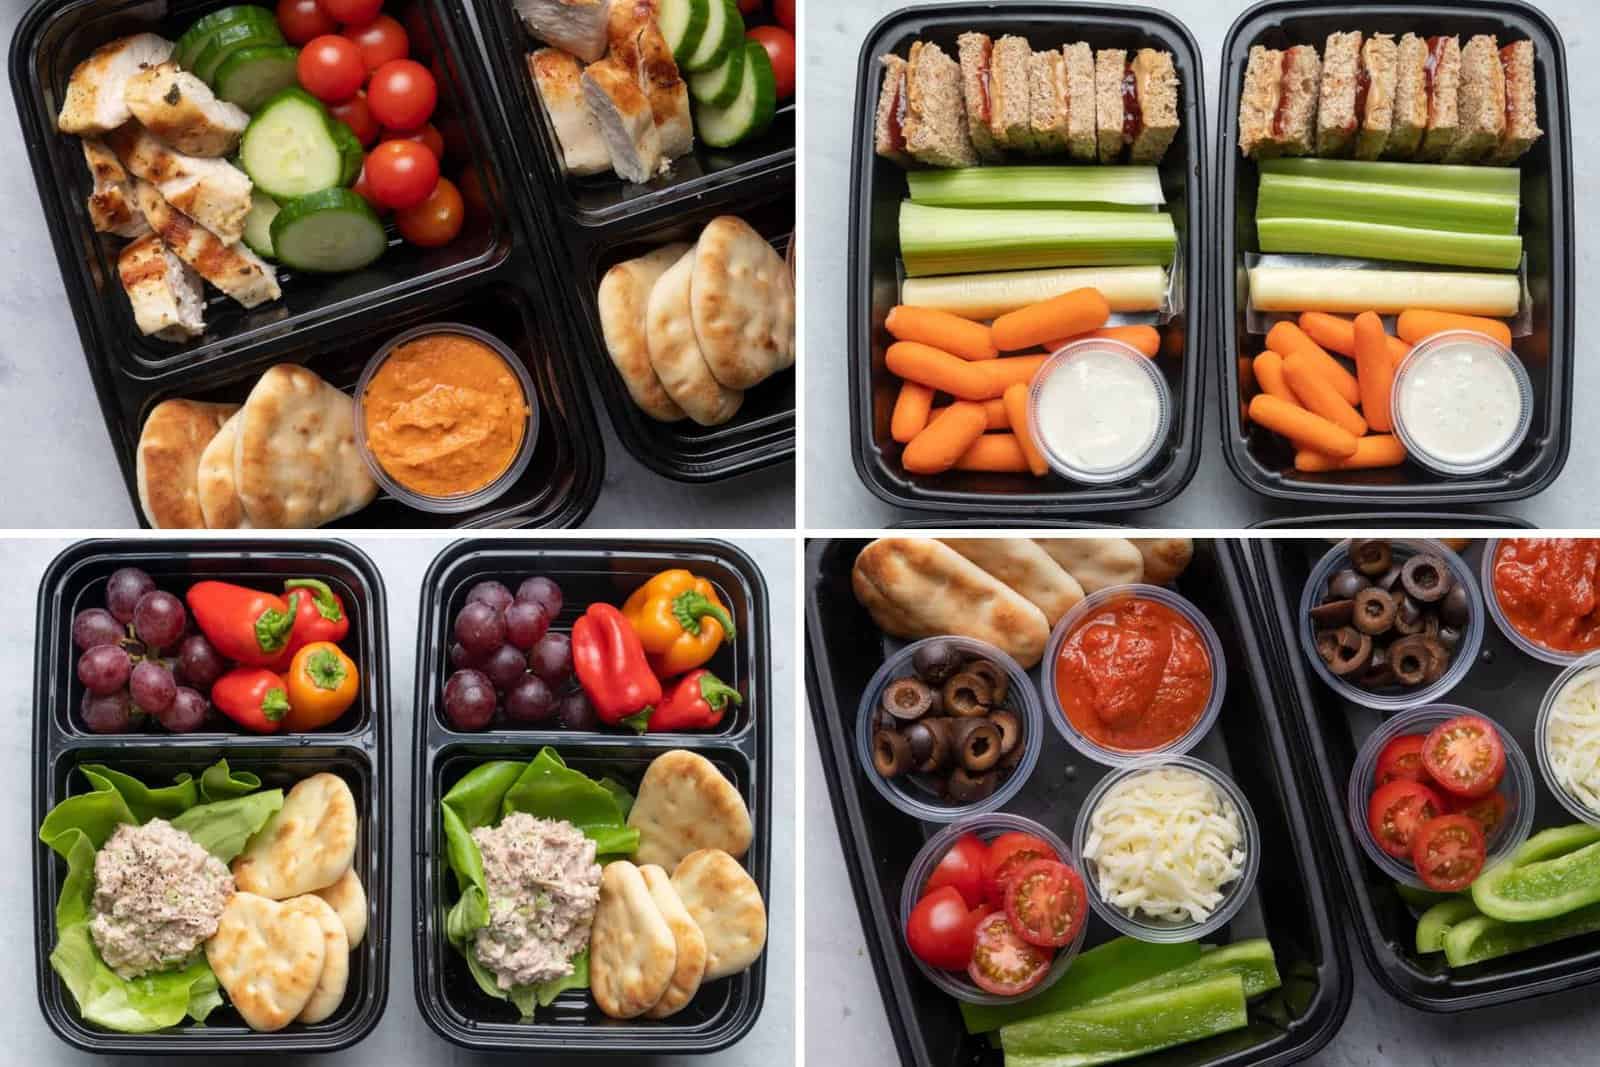 18 Adult Lunchables That'll Make You Excited to Meal Prep